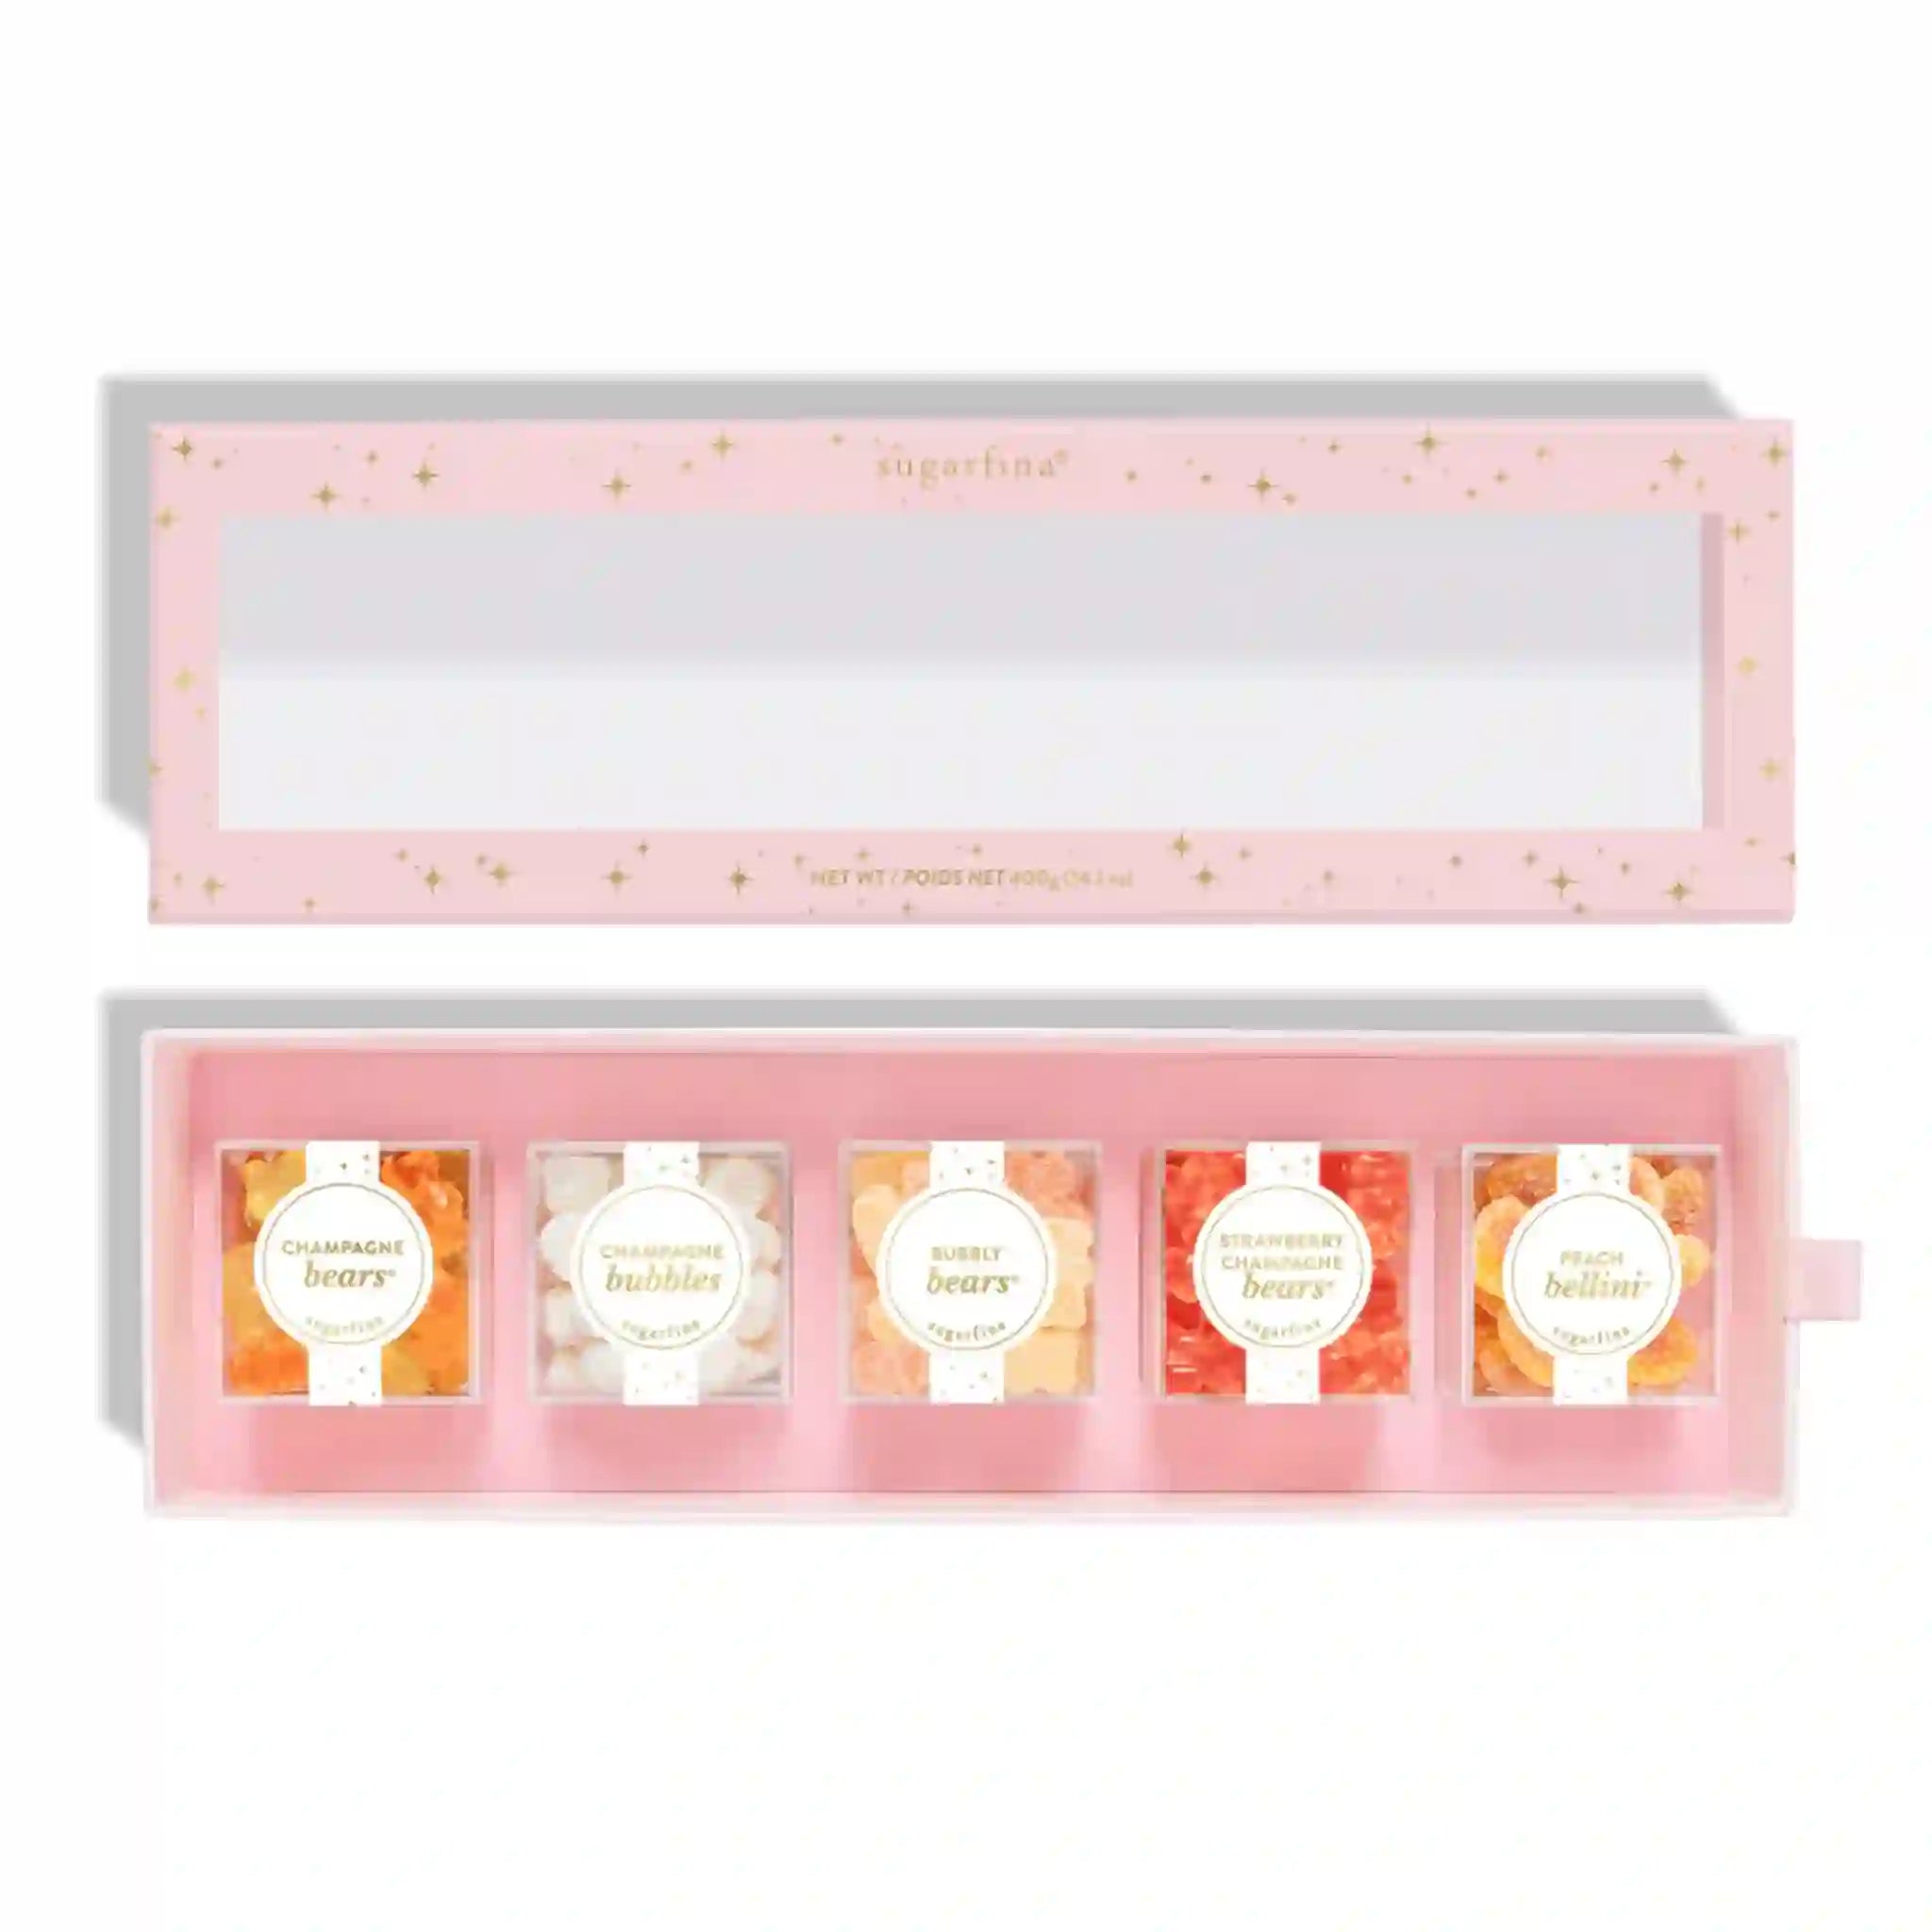 On a white background is a pink and gold star designed box filled with various Sugarfina candies. 